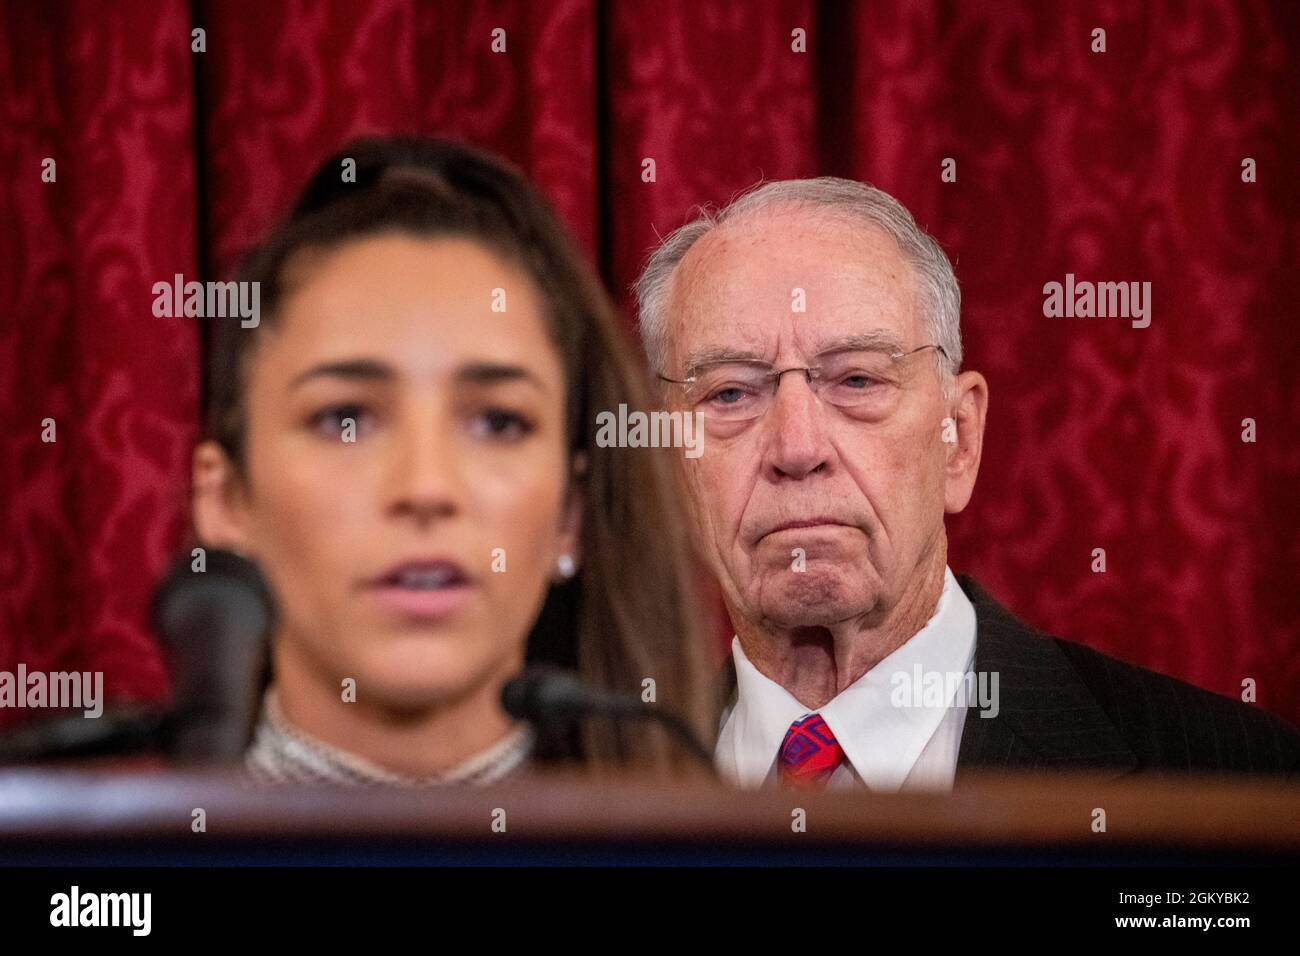 United States Senator Chuck Grassley (Republican of Iowa) listens as former U.S. Olympic gymnast Aly Raisman offers remarks during a press conference to talk about the abuse that she and other women gymnasts experienced from Larry Nassar, the now-incarcerated U.S. women's national gymnastics team doctor, and the FBIâs handling of their cases, in the Russell Senate Office Building in Washington, DC, Wednesday, September 15, 2021. Credit: Rod Lamkey/CNP Stock Photo